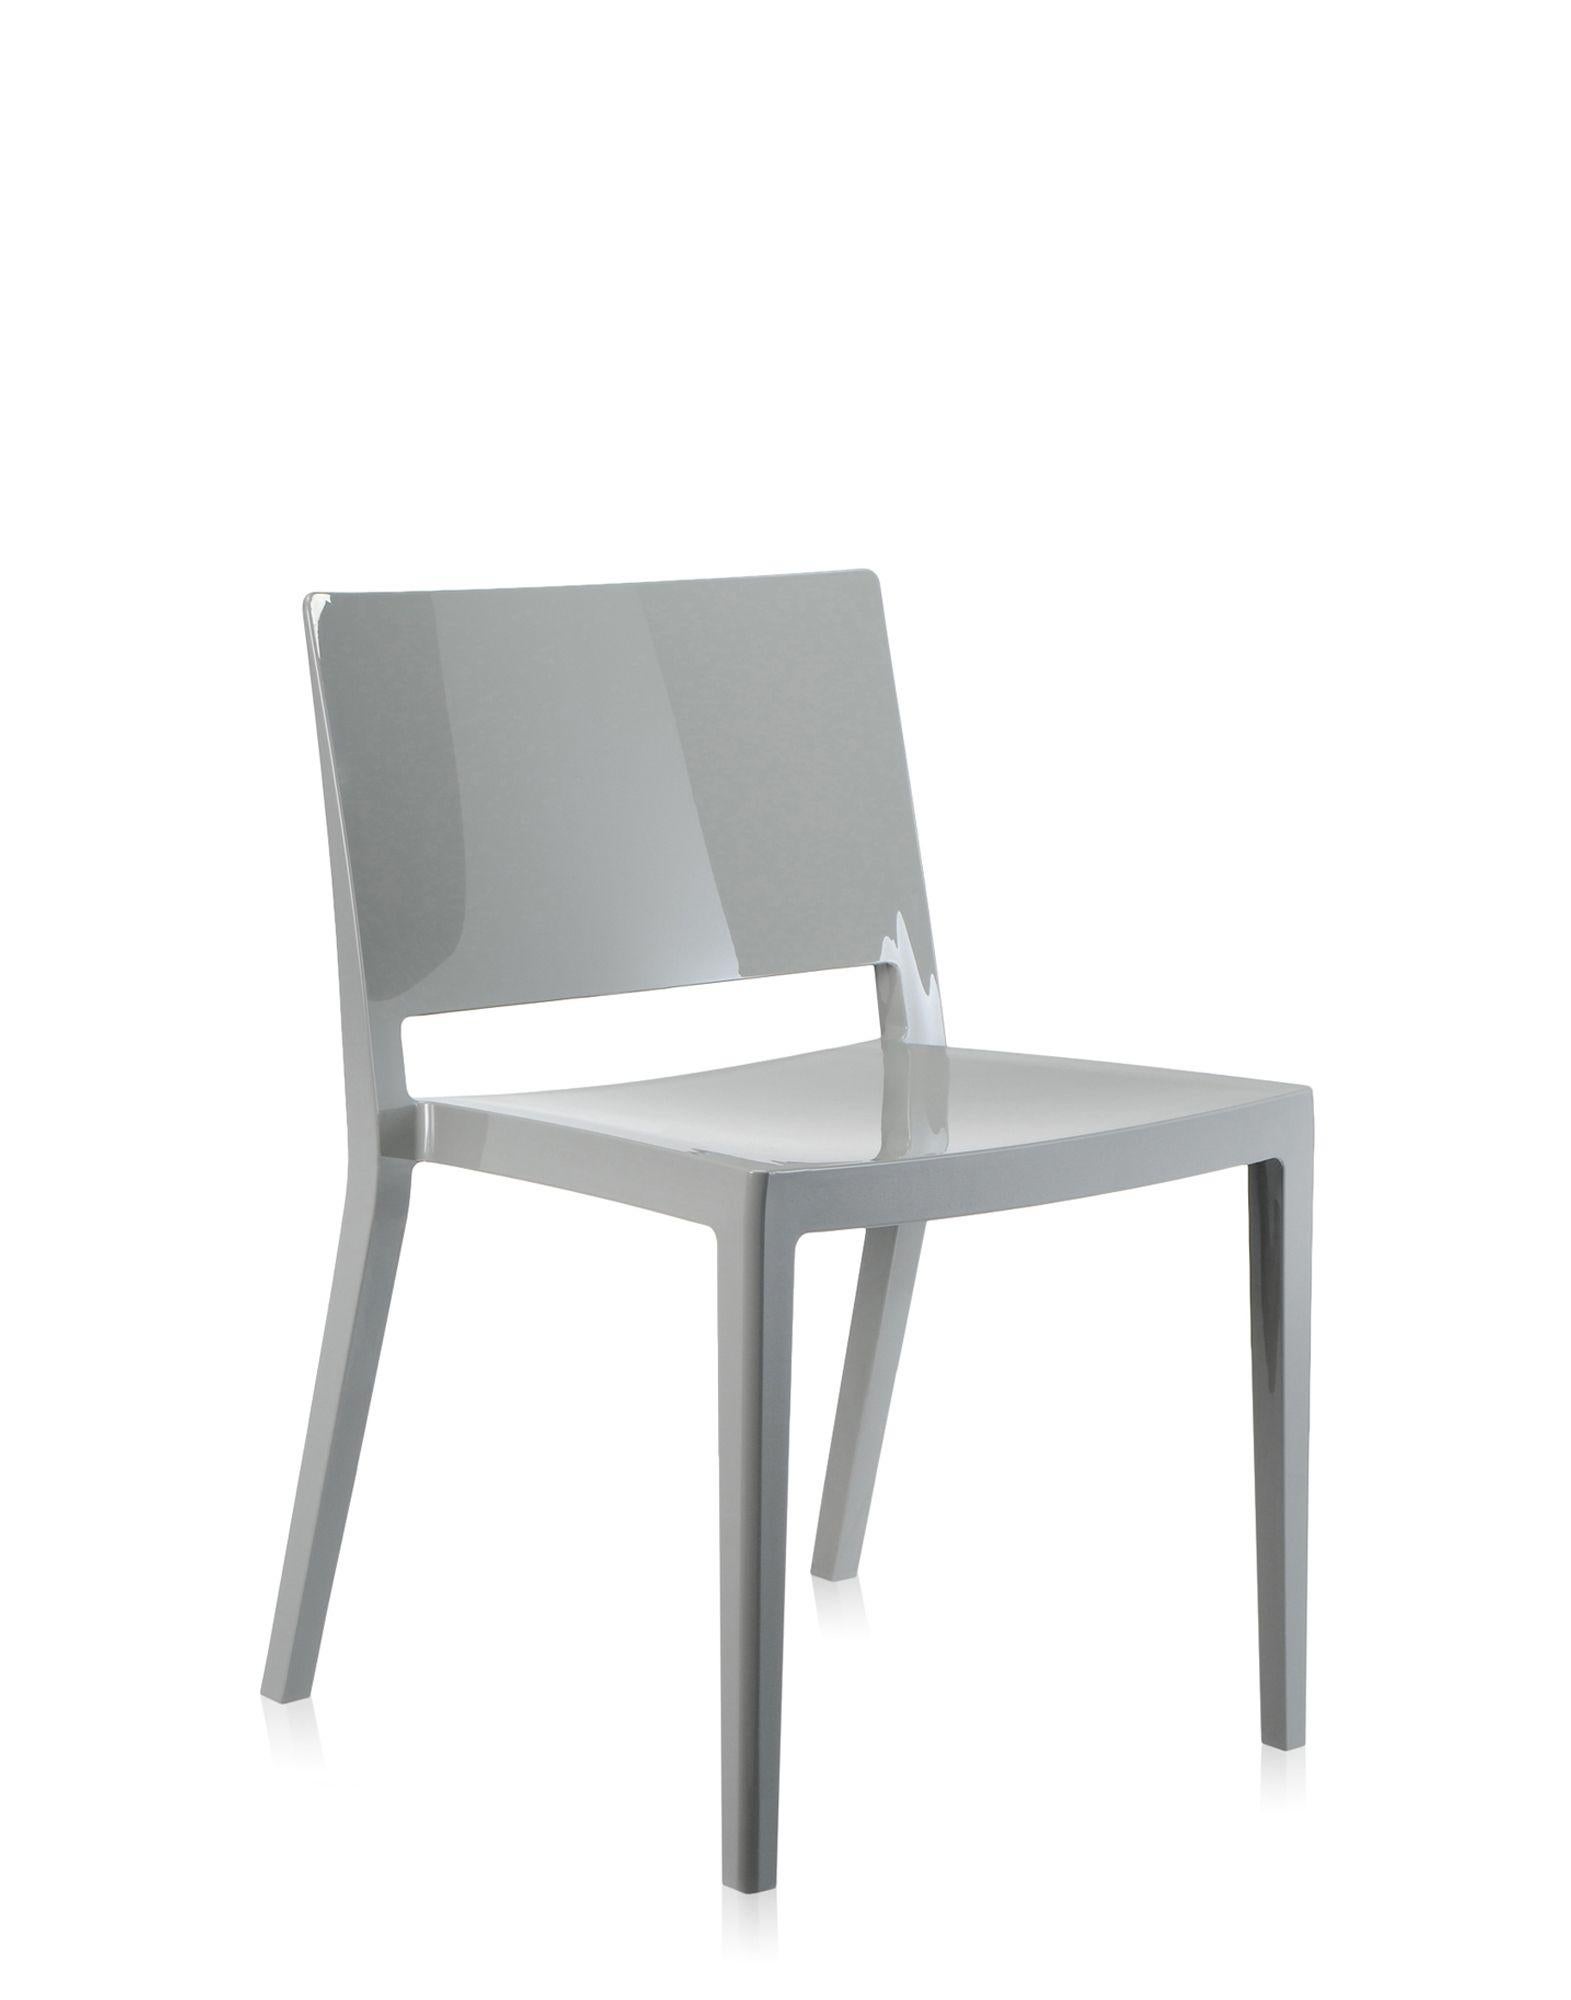 A light, ultra-streamlined chair, so representative of the minimalist and elegant style of its designer, Piero Lissoni. Made of a mass-tinted thermoplastic technopolymer, Lizz is manufactured in a single piece, using gas-blowing technology. Its name